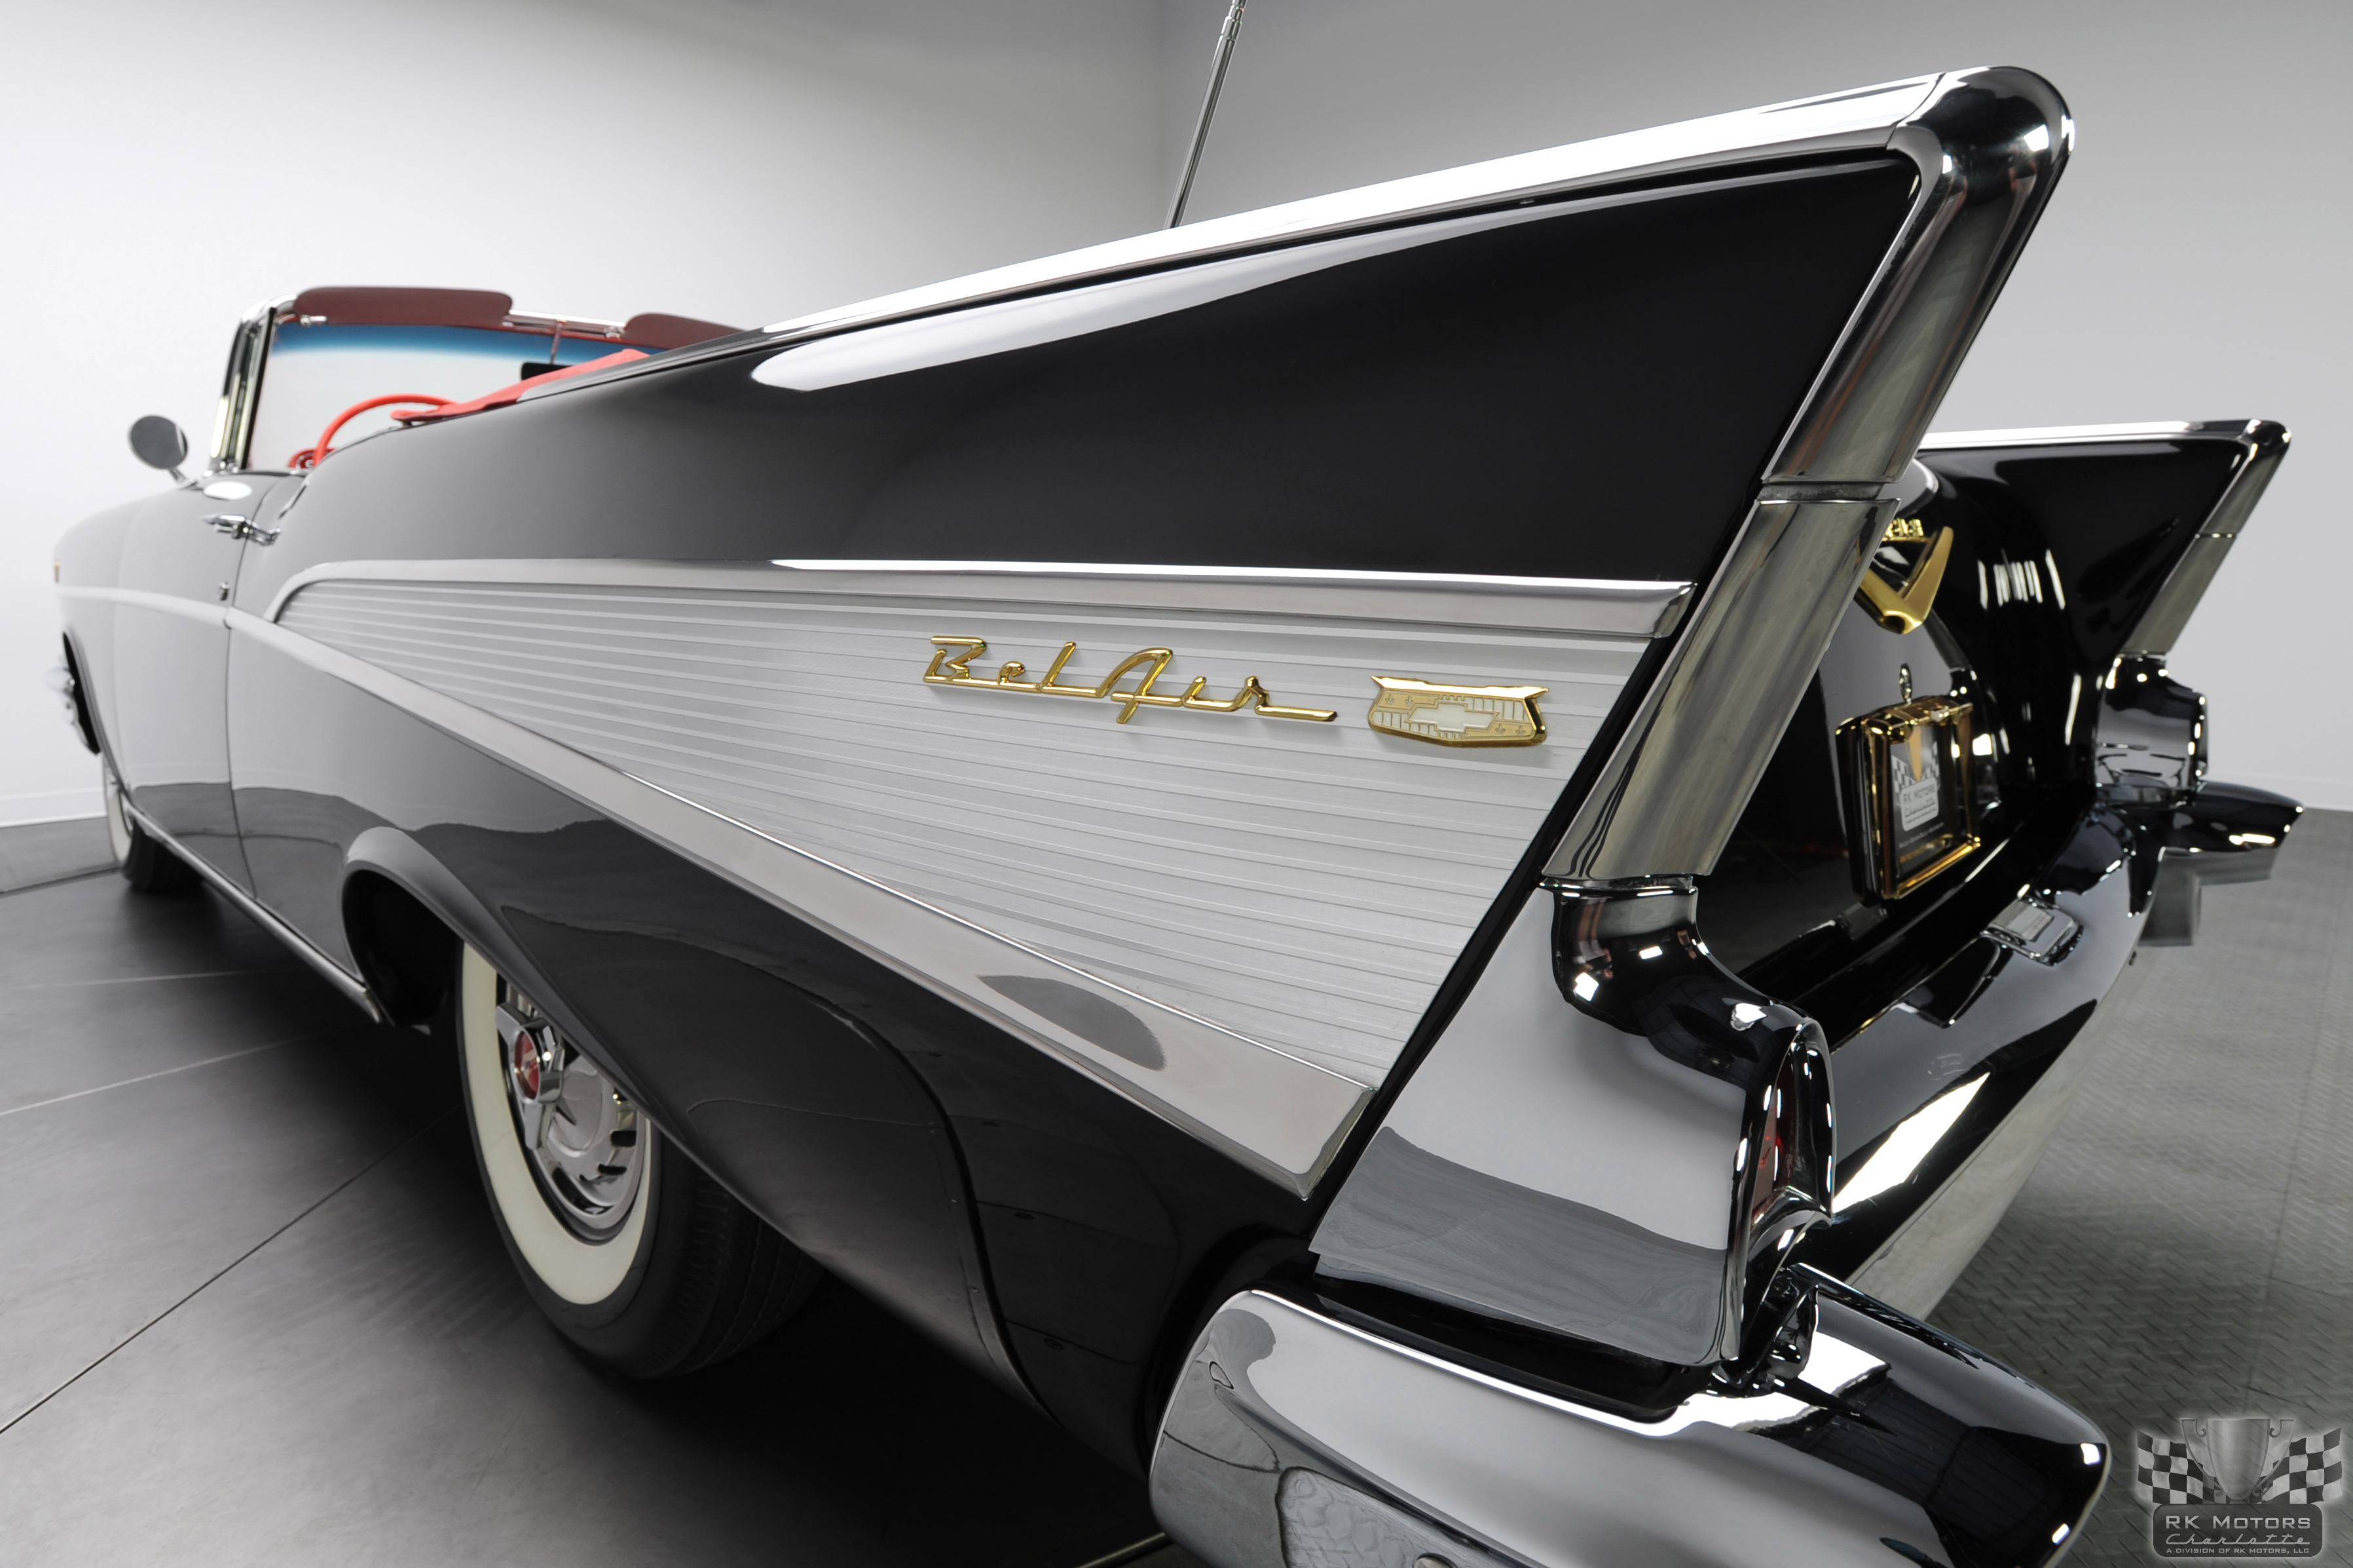 Chevy Belair Wallpapers